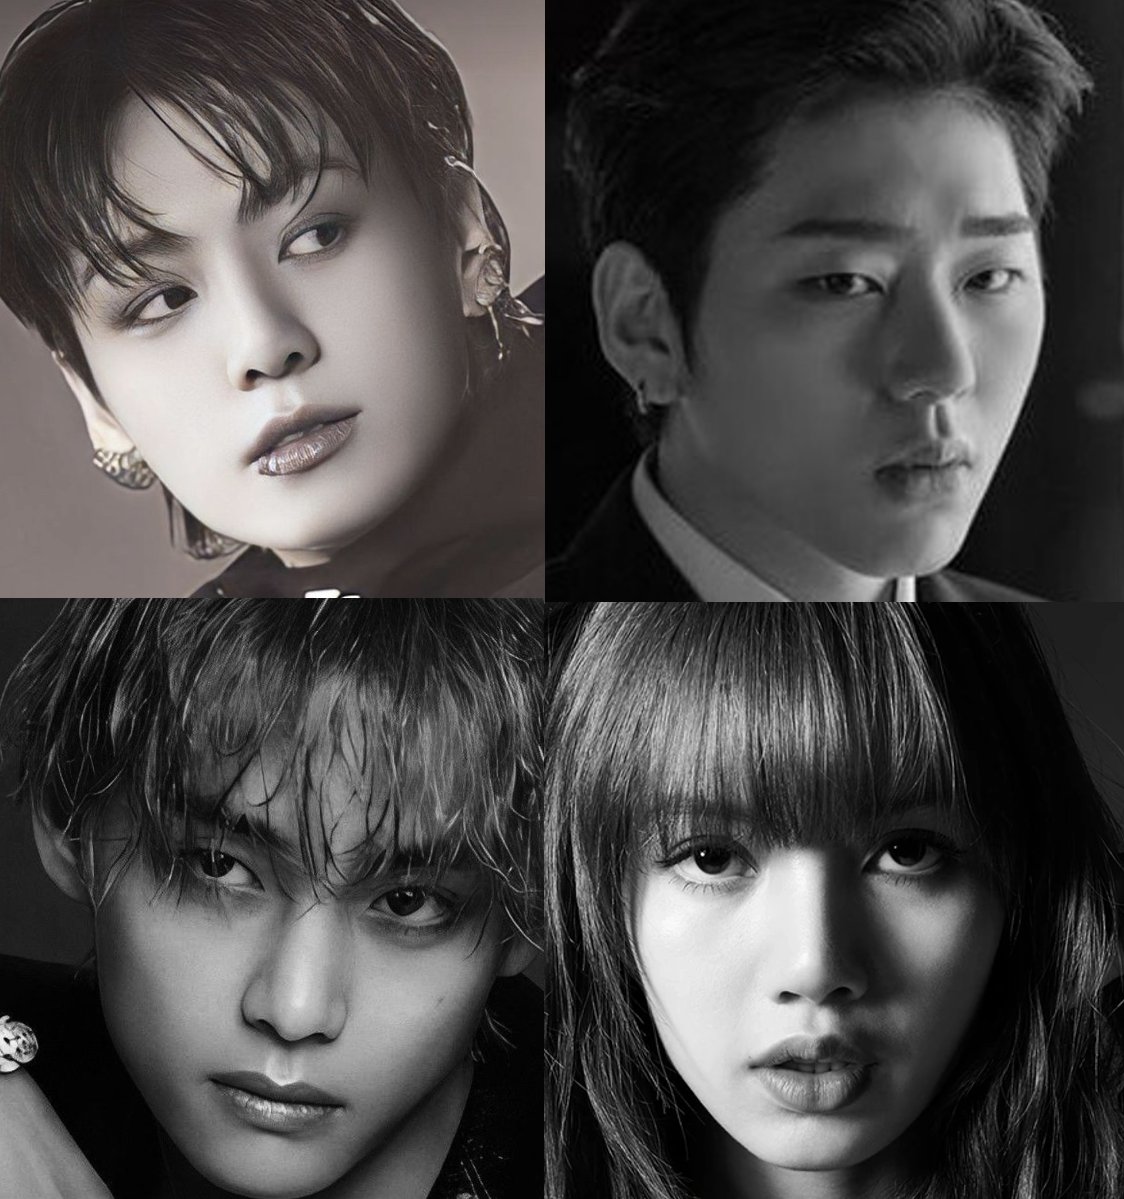 Kpop Soloists with the Most Monthly listeners on Spotify currently:
#JENNIE — 35,8M  
#JungKook — 24,4M
#ZICO — 7,9M 
#V — 7,8M 
#LISA — 7,7M

 #OddAtelier @oddatelier 
@zico_koz 
#BTS @BTS_twt 
#Lloud @weareloudd